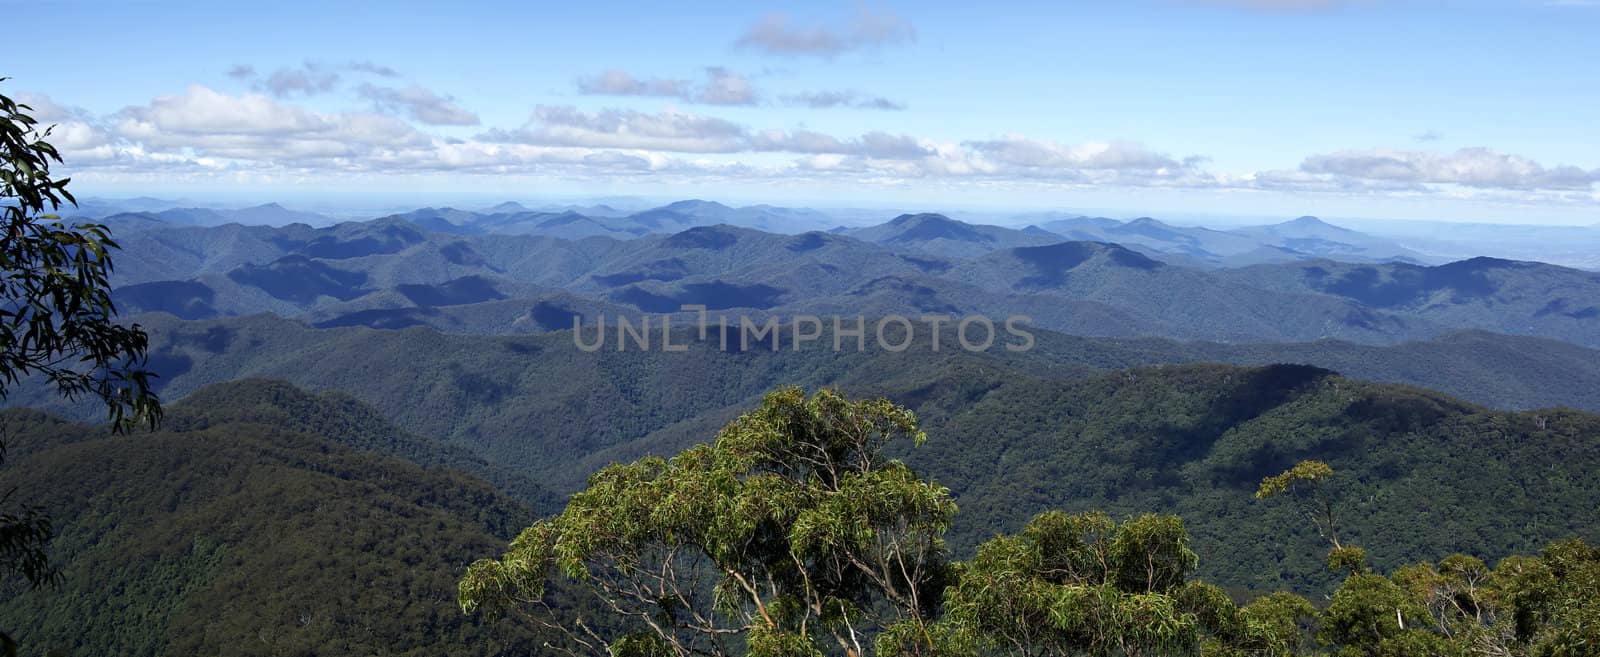 panorama from point lookout looking over the forests and rainforestsof the oxley world heritage area